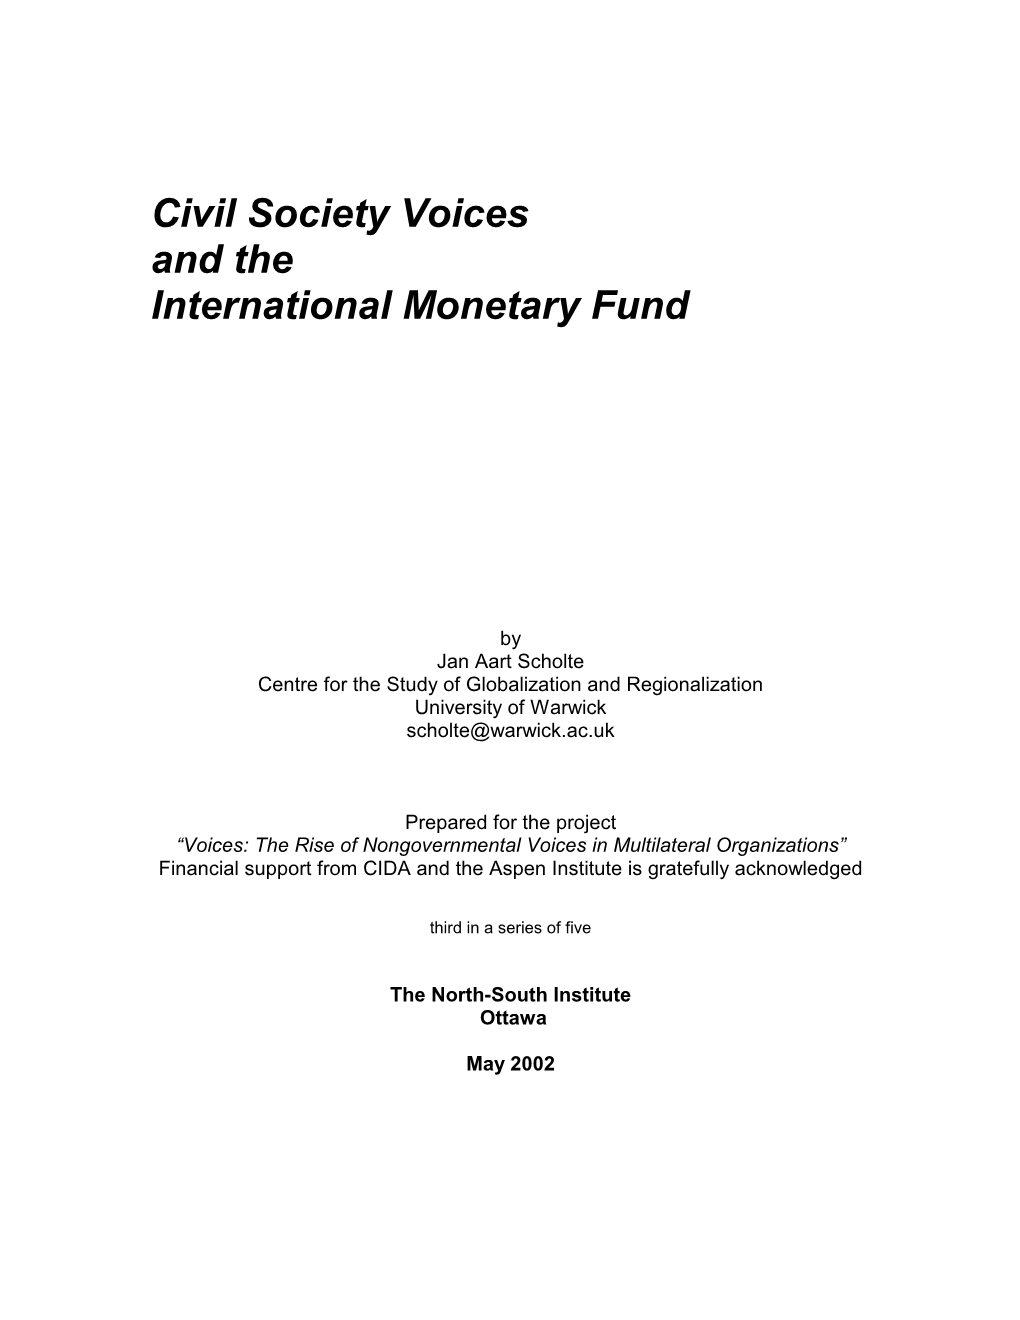 Civil Society Voices and the International Monetary Fund